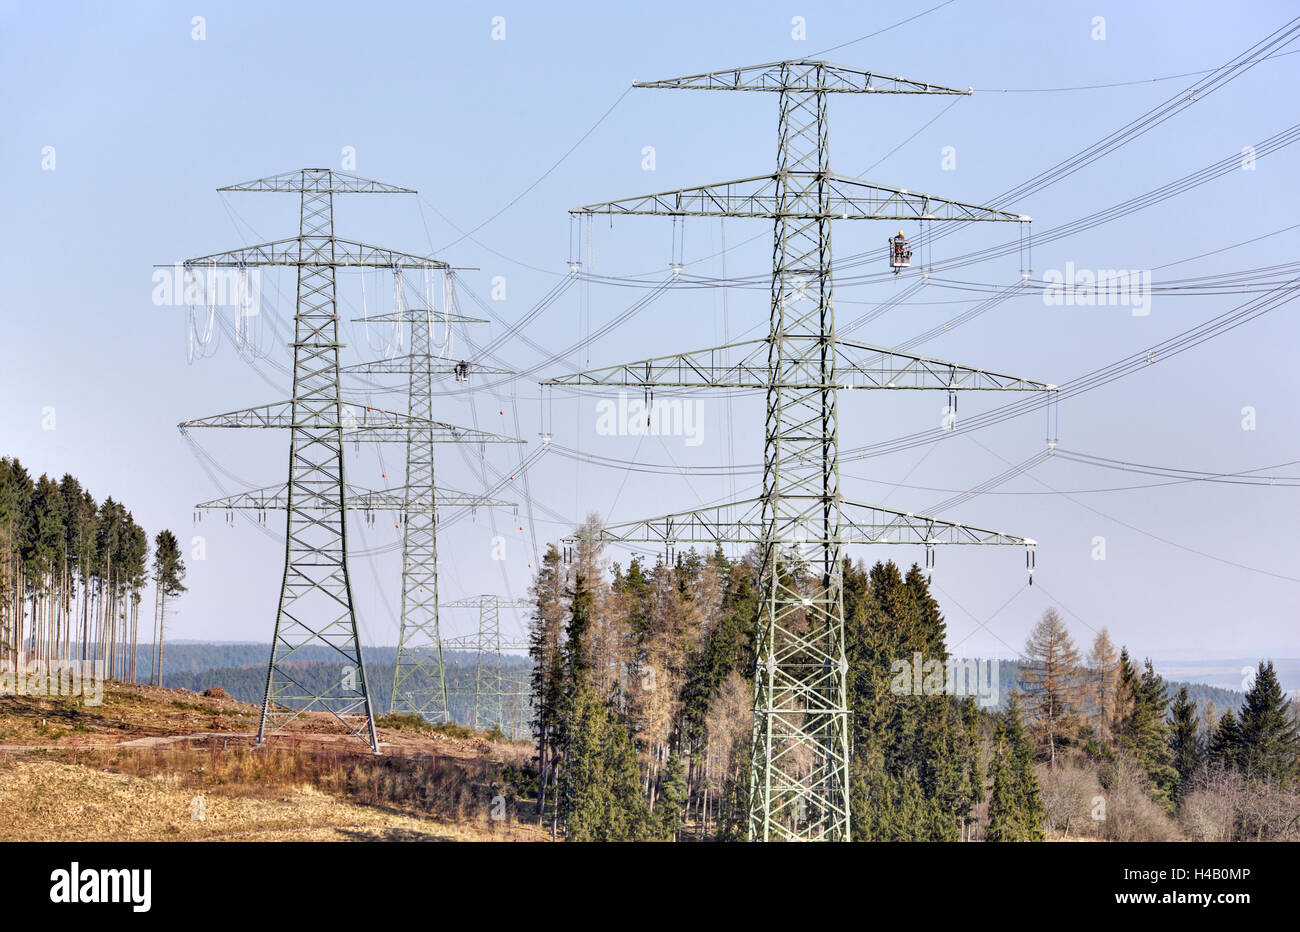 High-voltage poles, wires, two men working on power line installation, gondolas, forest, swath, Thuringian Forest Stock Photo